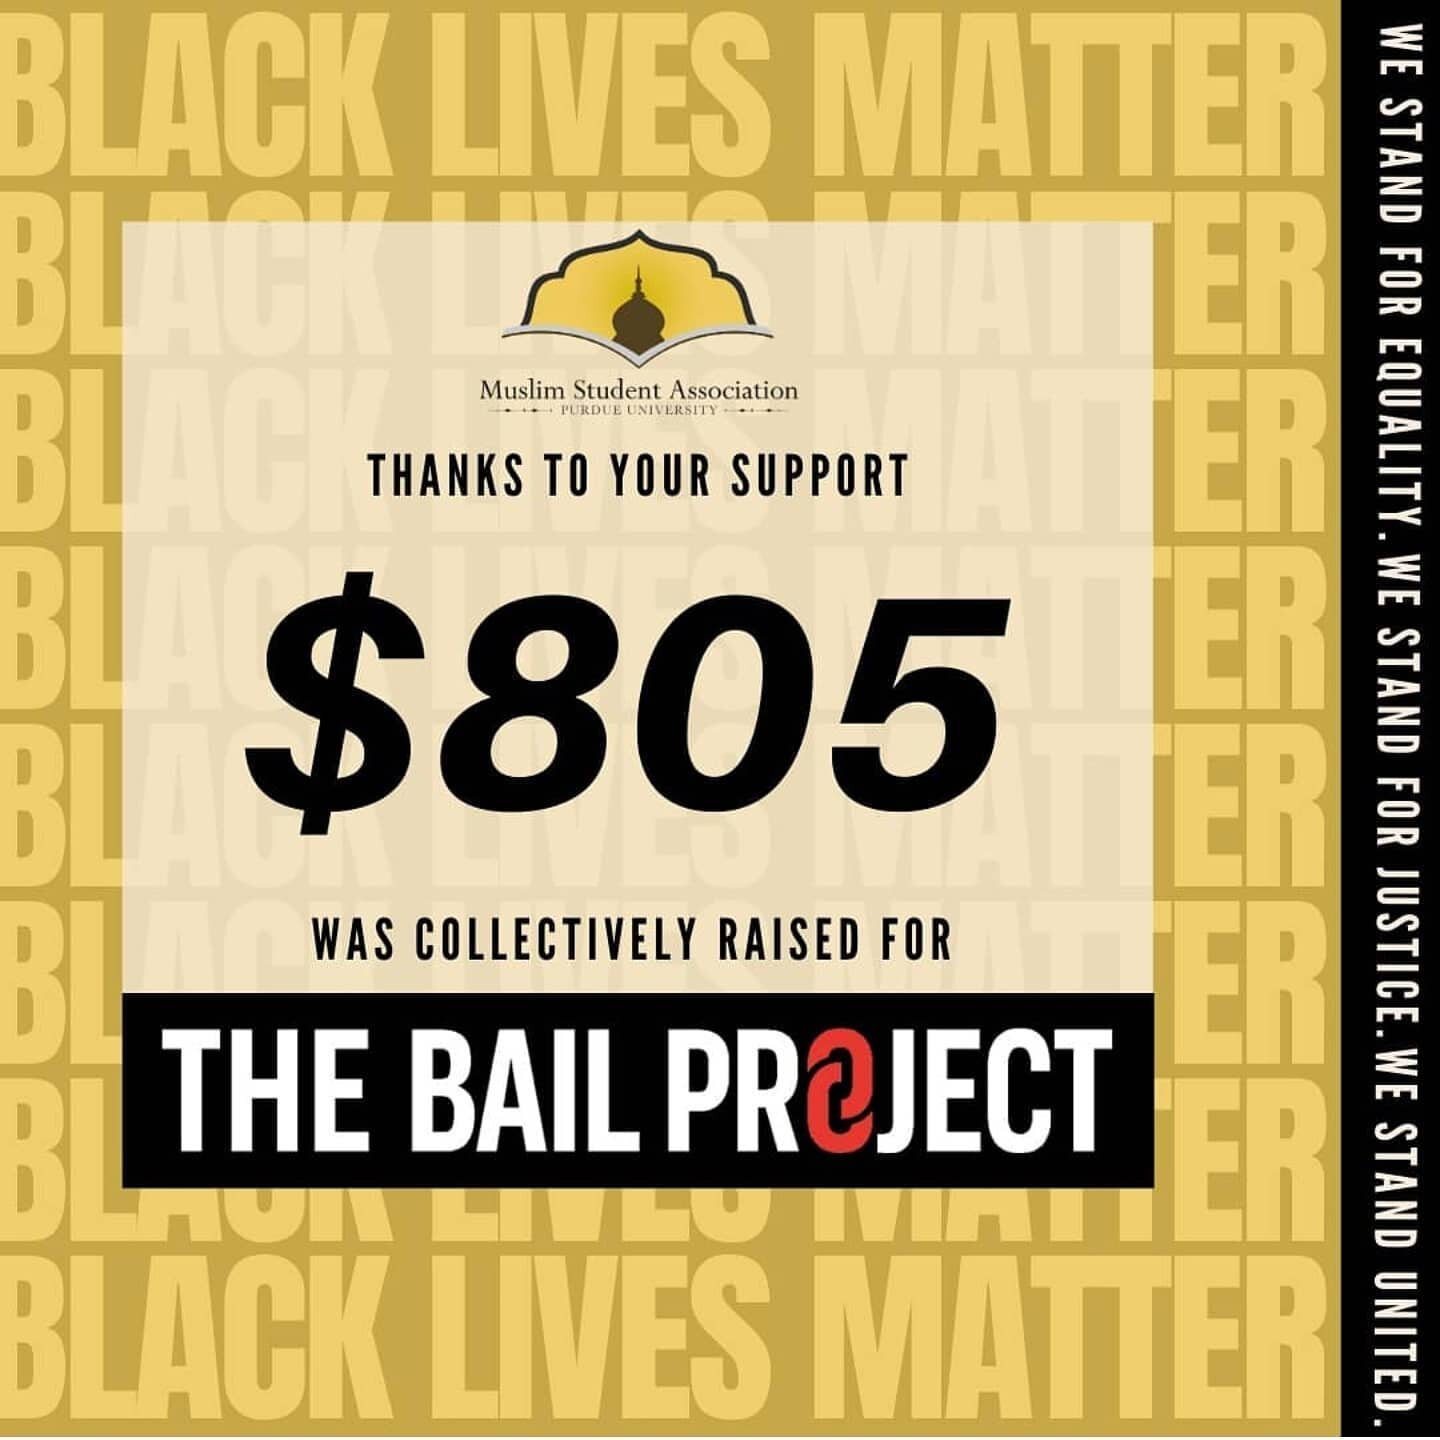 ALHAMDULLILAH. We are so thankful that the Purdue community has been abundantly generous and firm in supporting this cause. The Prophet (SAS) said: &quot;None of you truly believes until he loves for his brother what he loves for himself.&quot; We wi